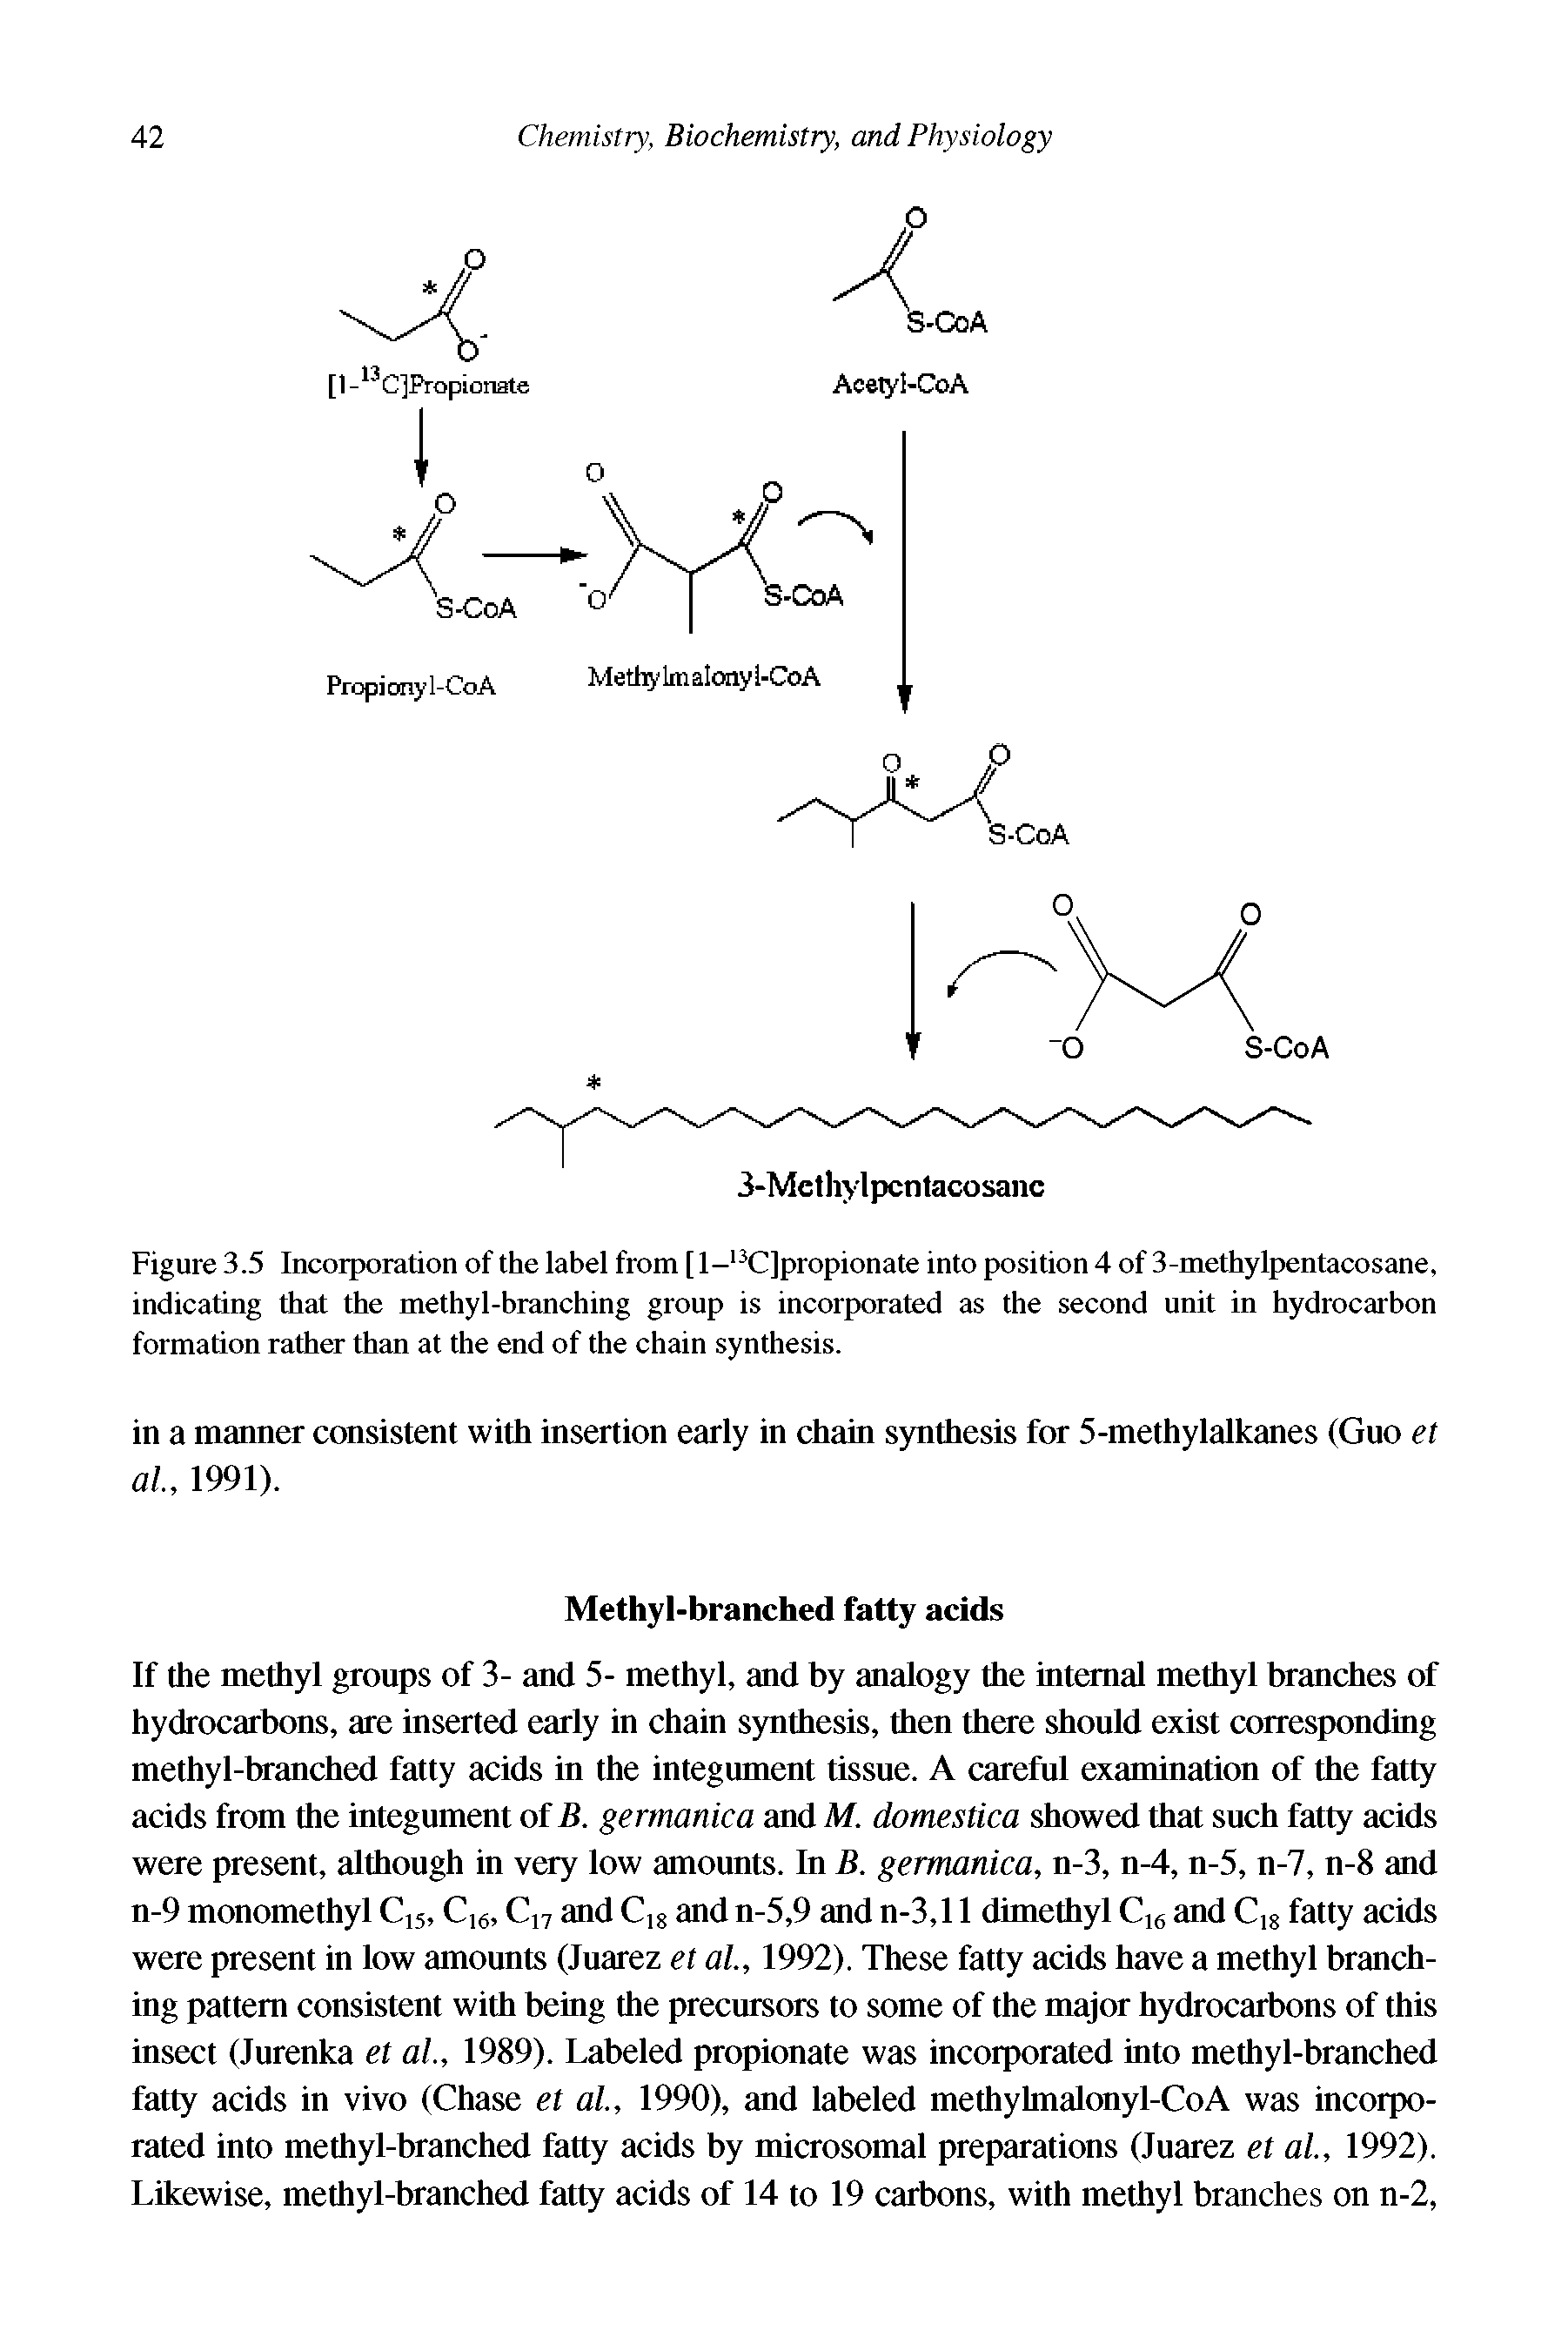 Figure 3.5 Incorporation of the label from [ l-13C]propionate into position 4 of 3-methylpentacosane, indicating that the methyl-branching group is incorporated as the second unit in hydrocarbon formation rather than at the end of the chain synthesis.